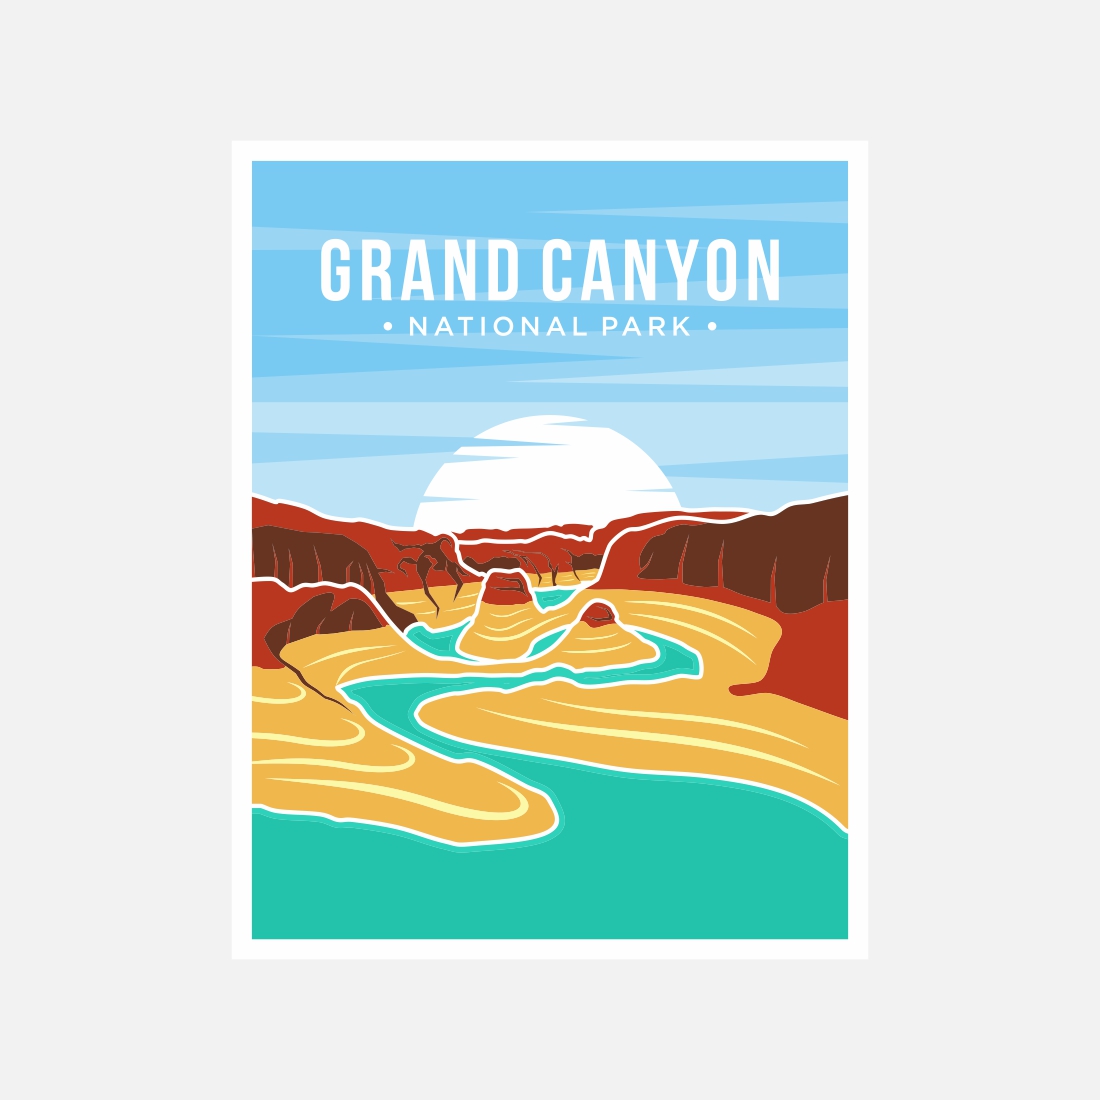 Grand Canyon National Park poster vector illustration design – Only $8 cover image.